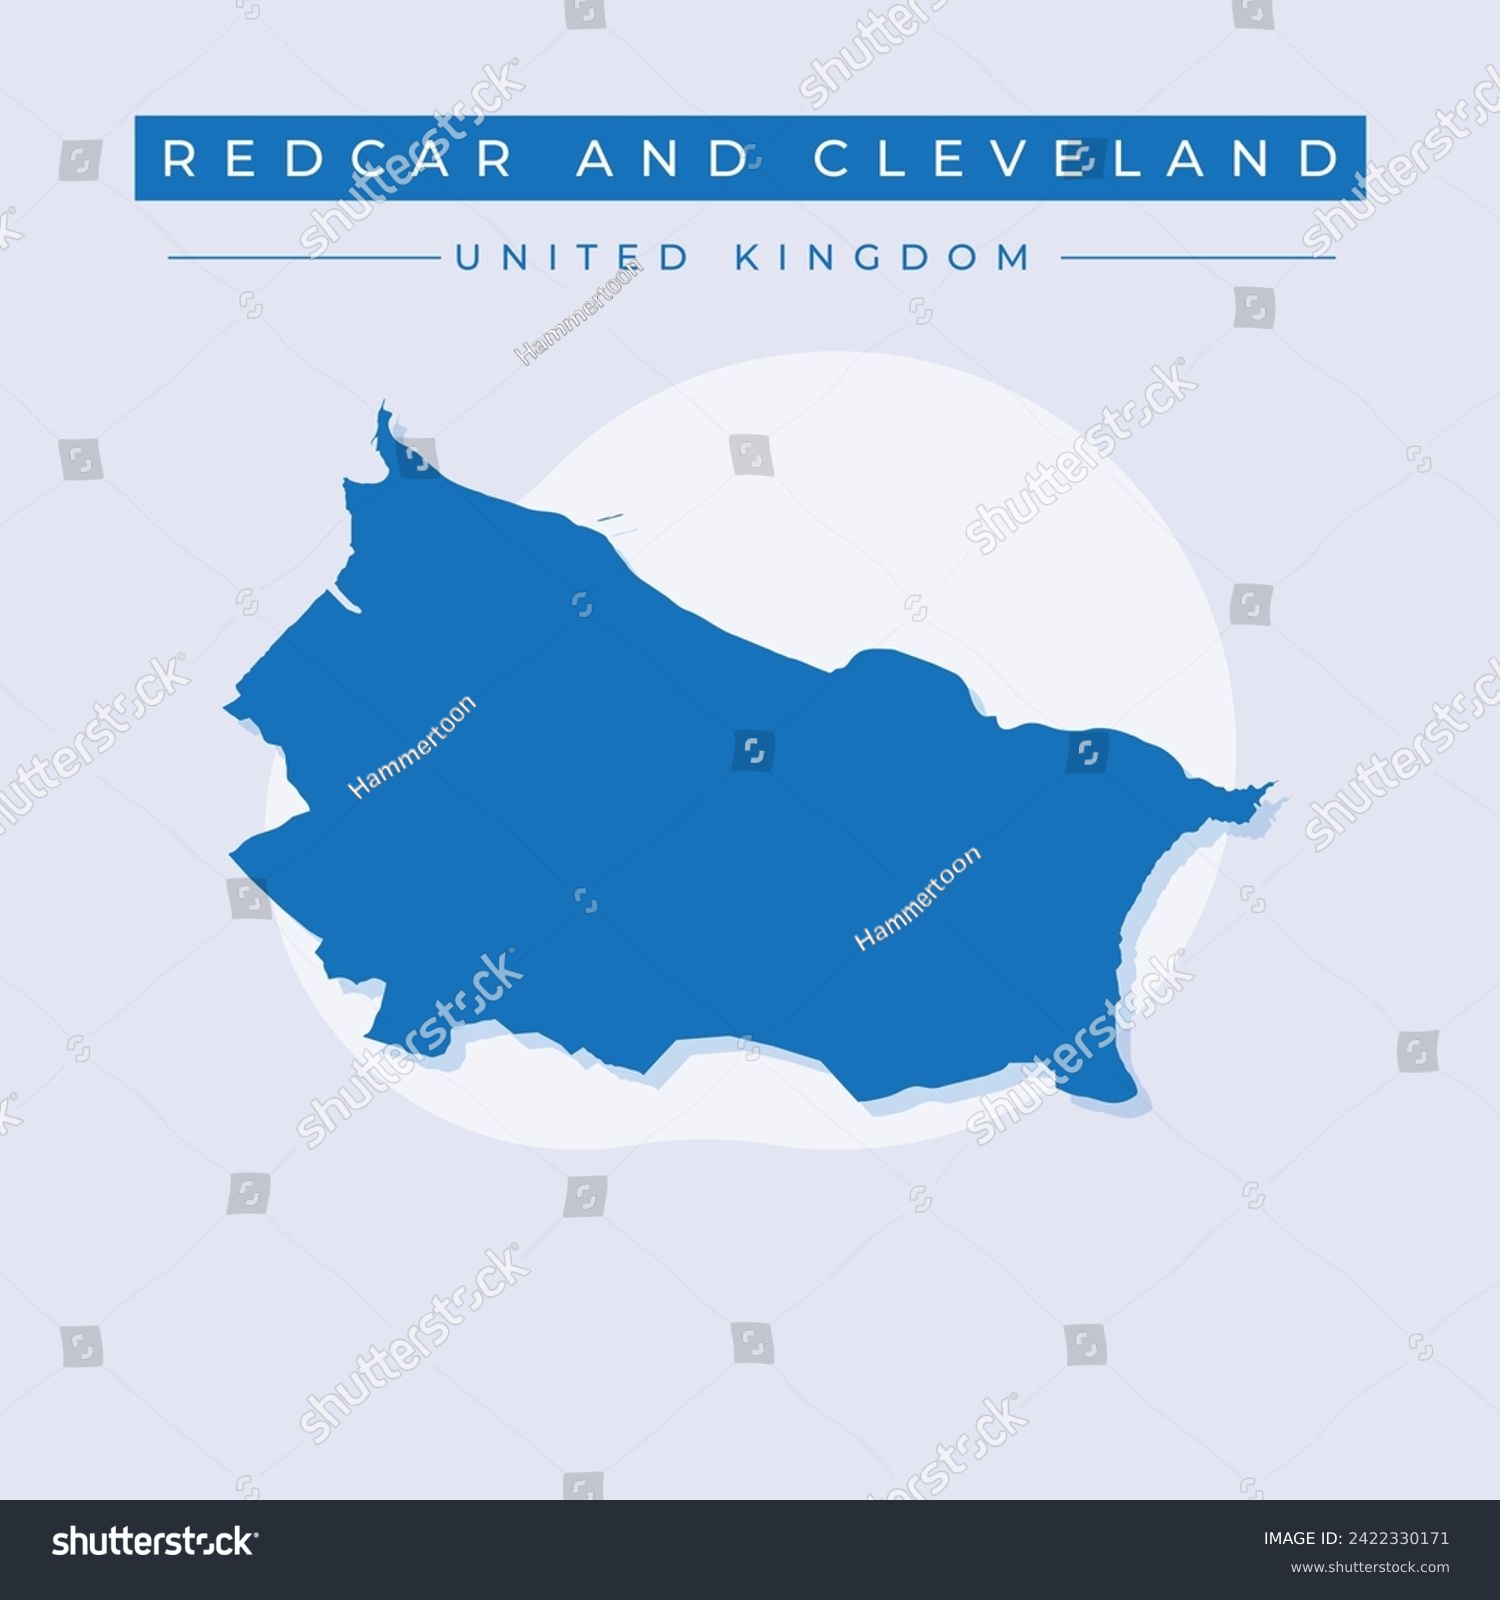 SVG of Redcar and Cleveland Borough with unitary authority status (United Kingdom of Great Britain and Northern Ireland, ceremonial county North Yorkshire, England) map vector illustration, scribble sketch svg